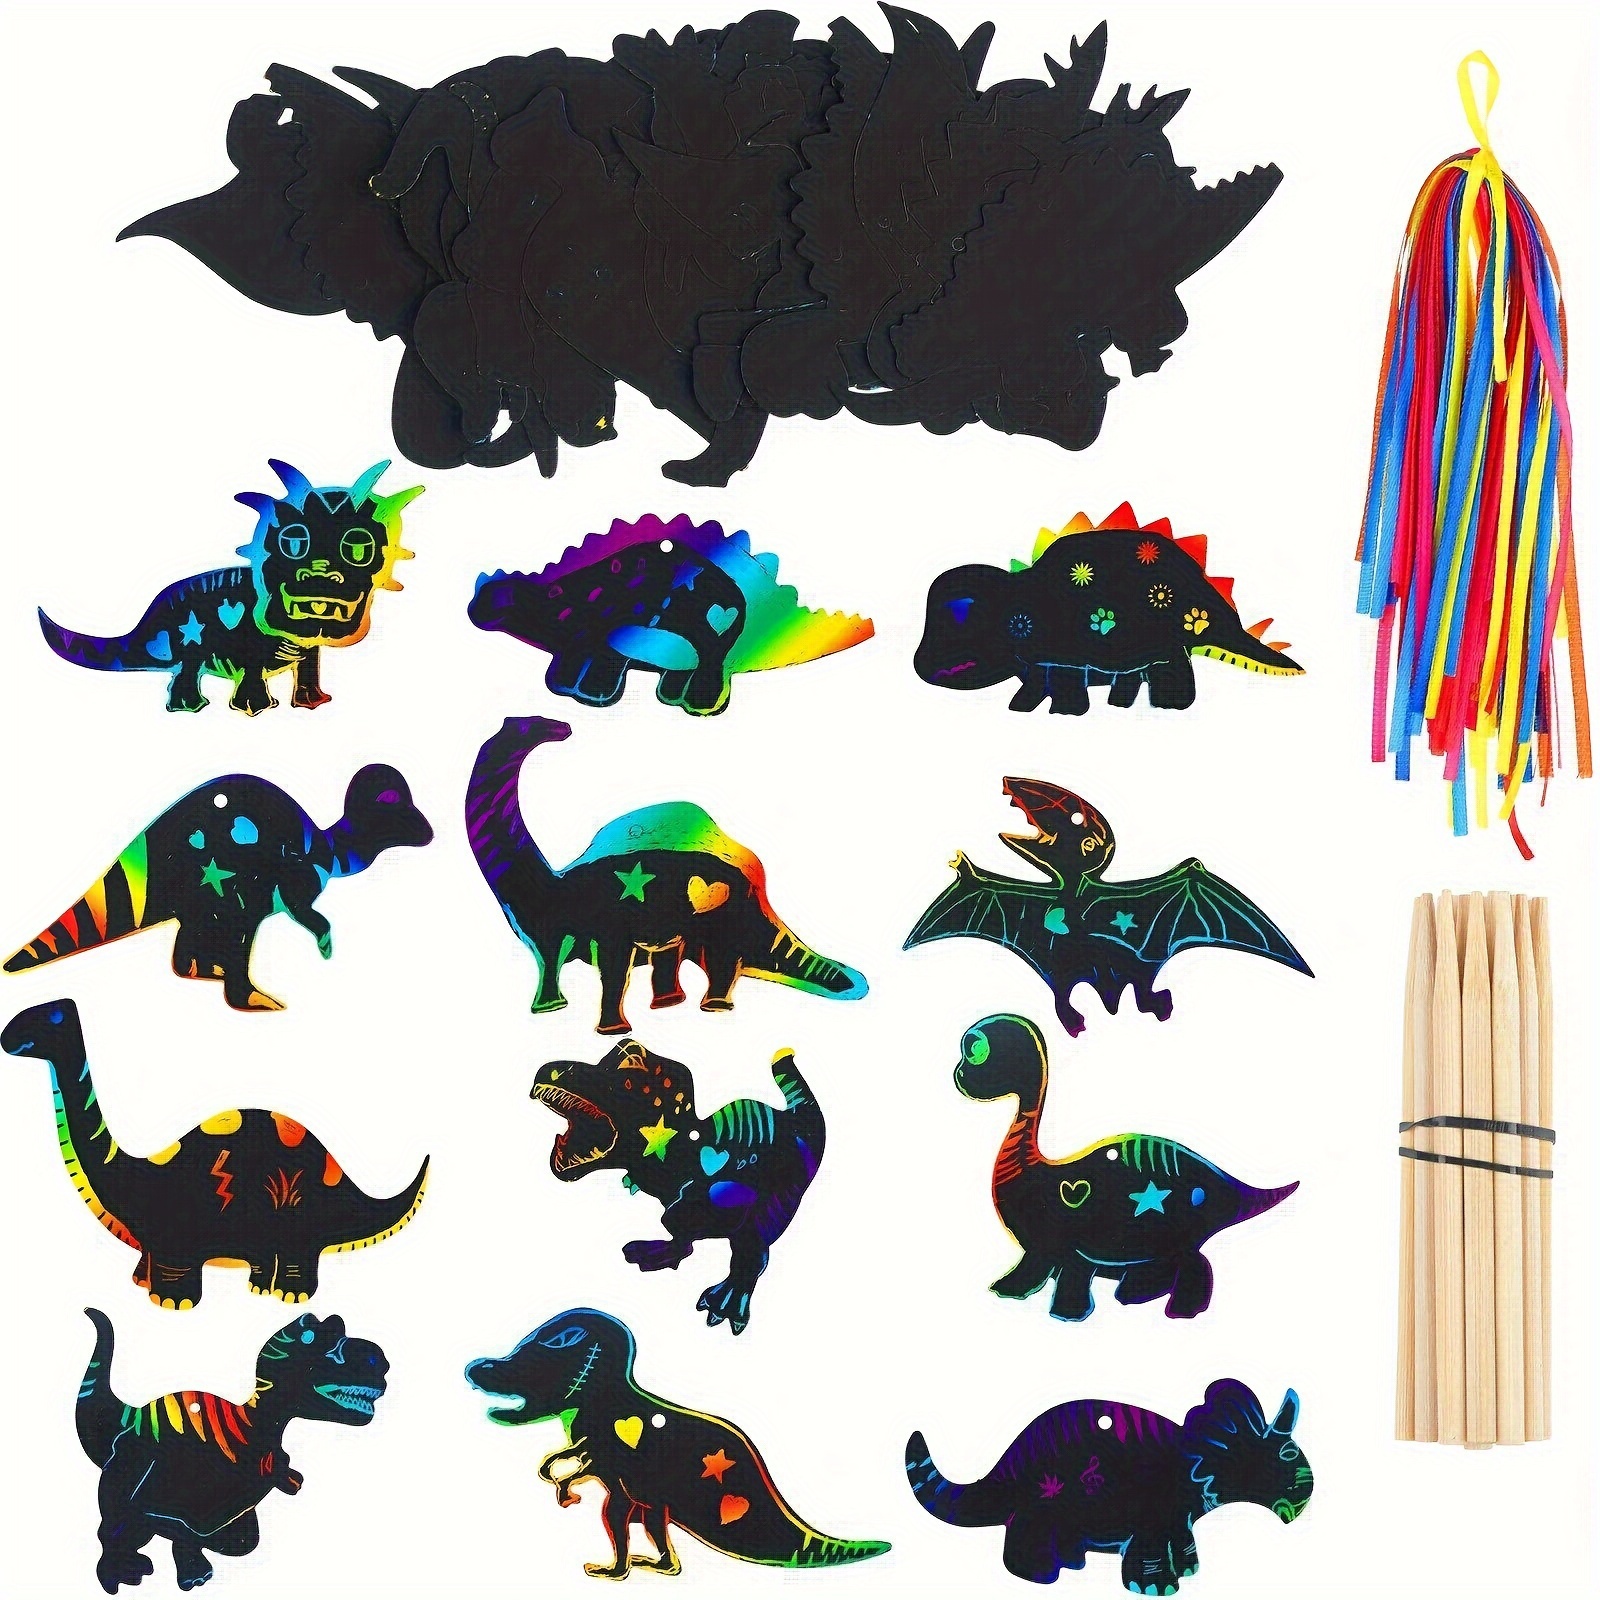 

24pcs Dinosaur Diy Rainbow Scratch Paper, Colorful Graffiti, Creative Decoration, Birthday Gift, Funny For Birthday Party Holiday Gift, Contains Bamboo Pen